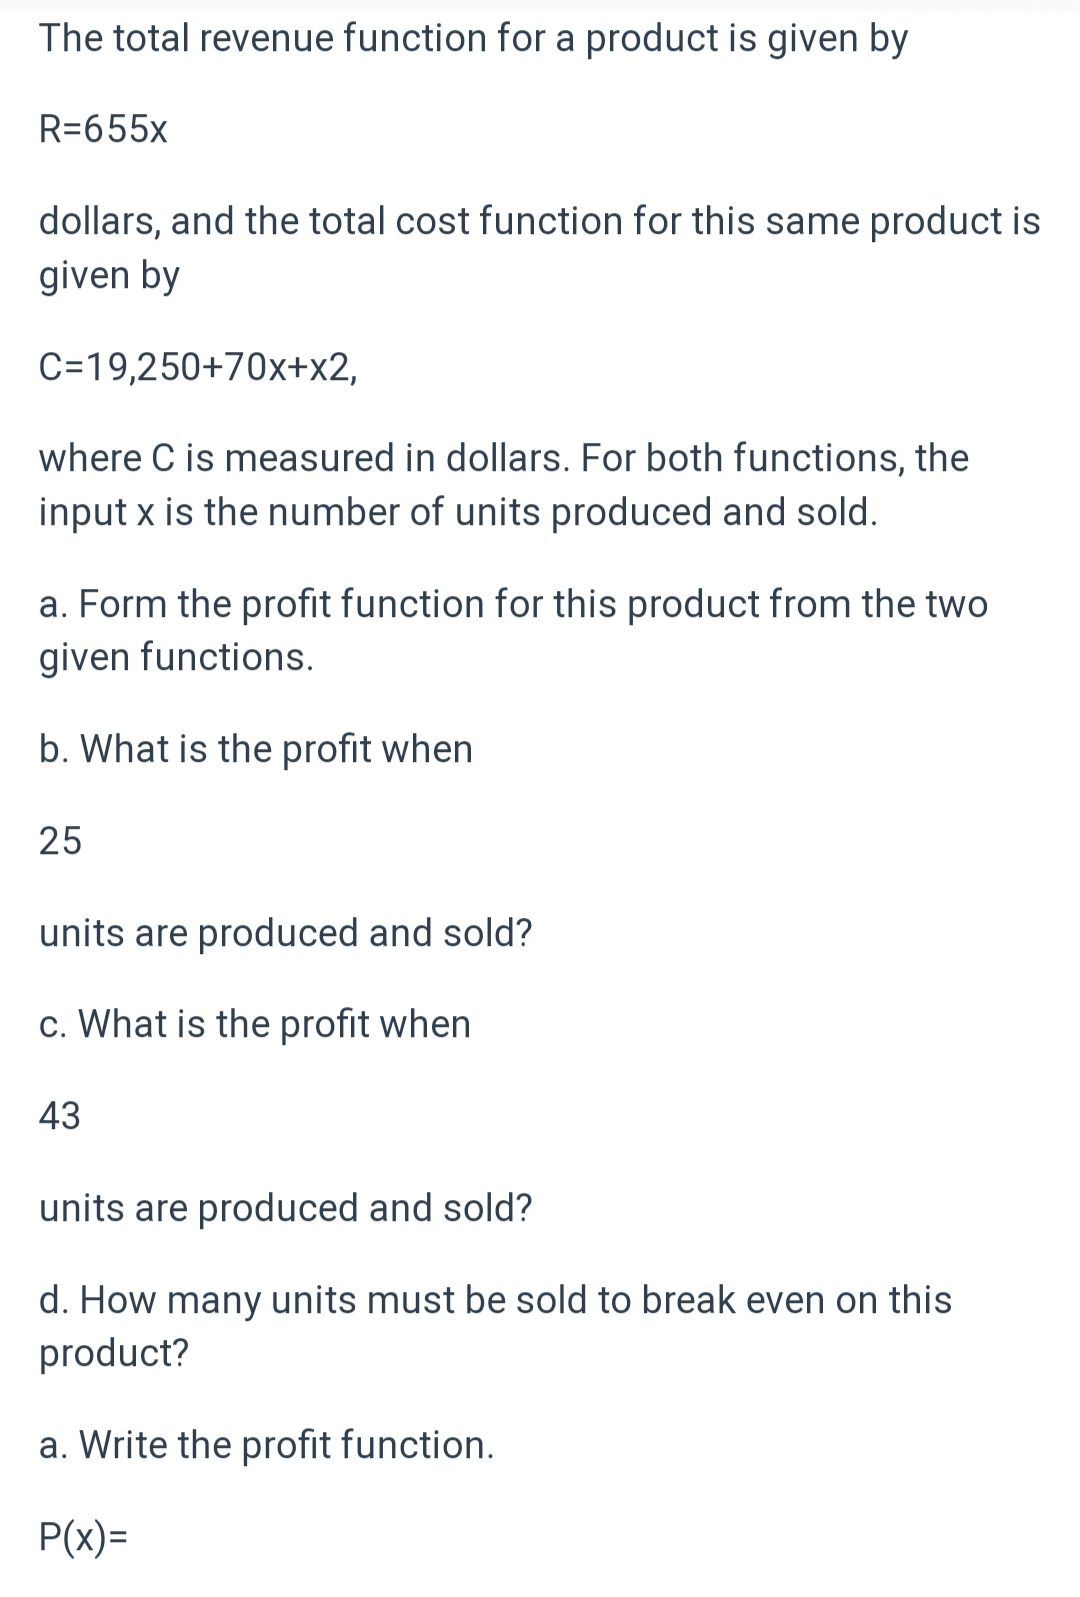 The total revenue function for a product is given by
R=655x
dollars, and the total cost function for this same product is
given by
C=19,250+70x+x2,
where C is measured in dollars. For both functions, the
input x is the number of units produced and sold.
a. Form the profit function for this product from the two
given functions.
b. What is the profit when
25
units are produced and sold?
c. What is the profit when
43
units are produced and sold?
d. How many units must be sold to break even on this
product?
a. Write the profit function.
P(x)=